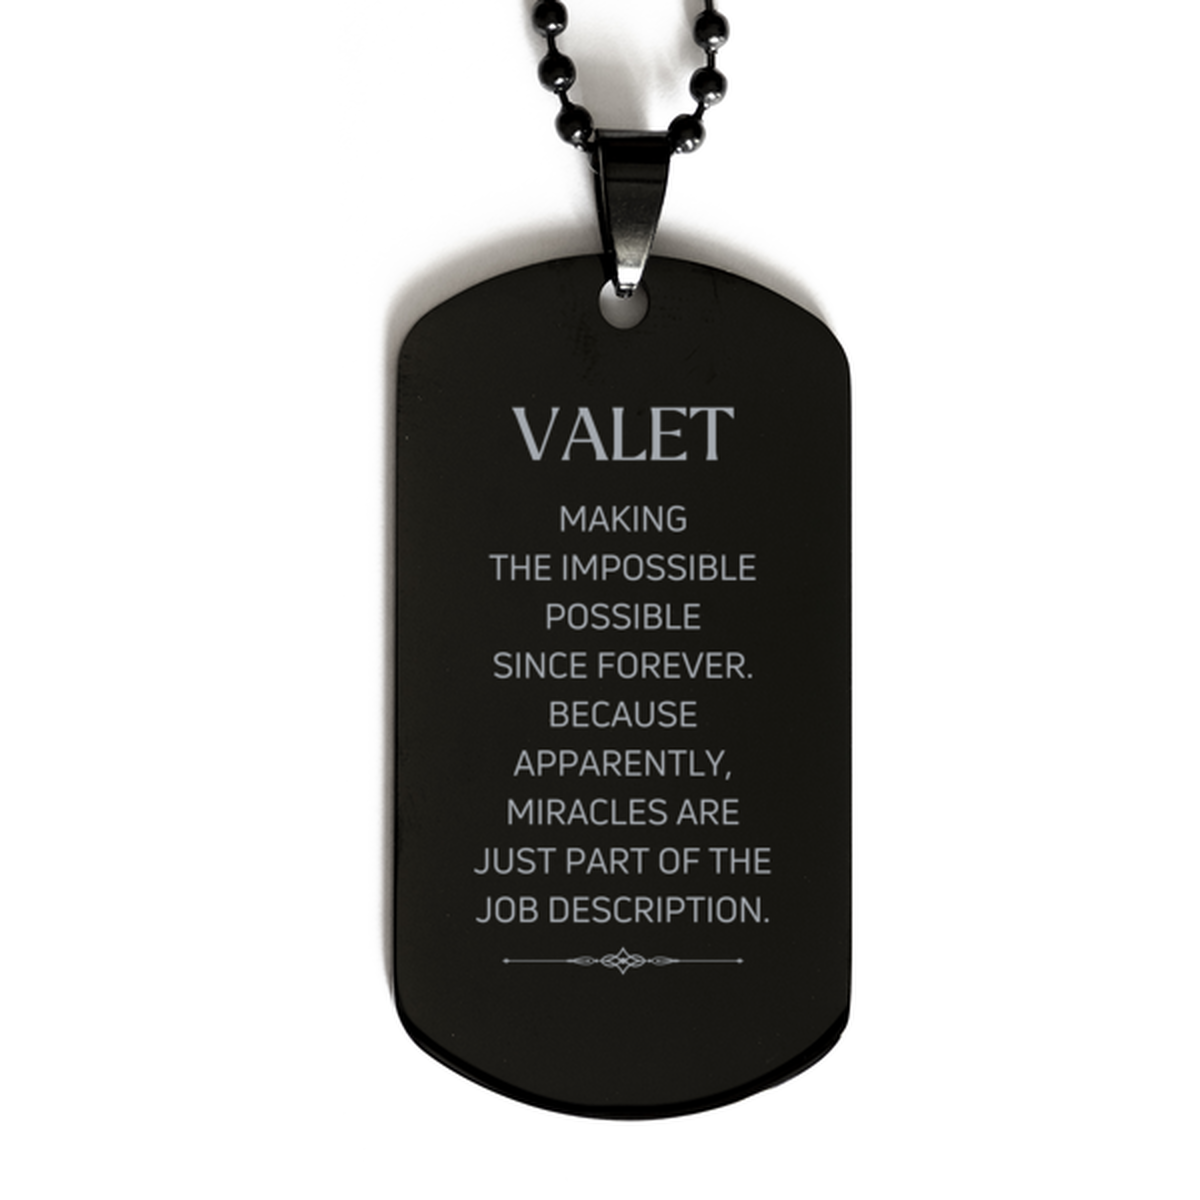 Funny Valet Gifts, Miracles are just part of the job description, Inspirational Birthday Black Dog Tag For Valet, Men, Women, Coworkers, Friends, Boss